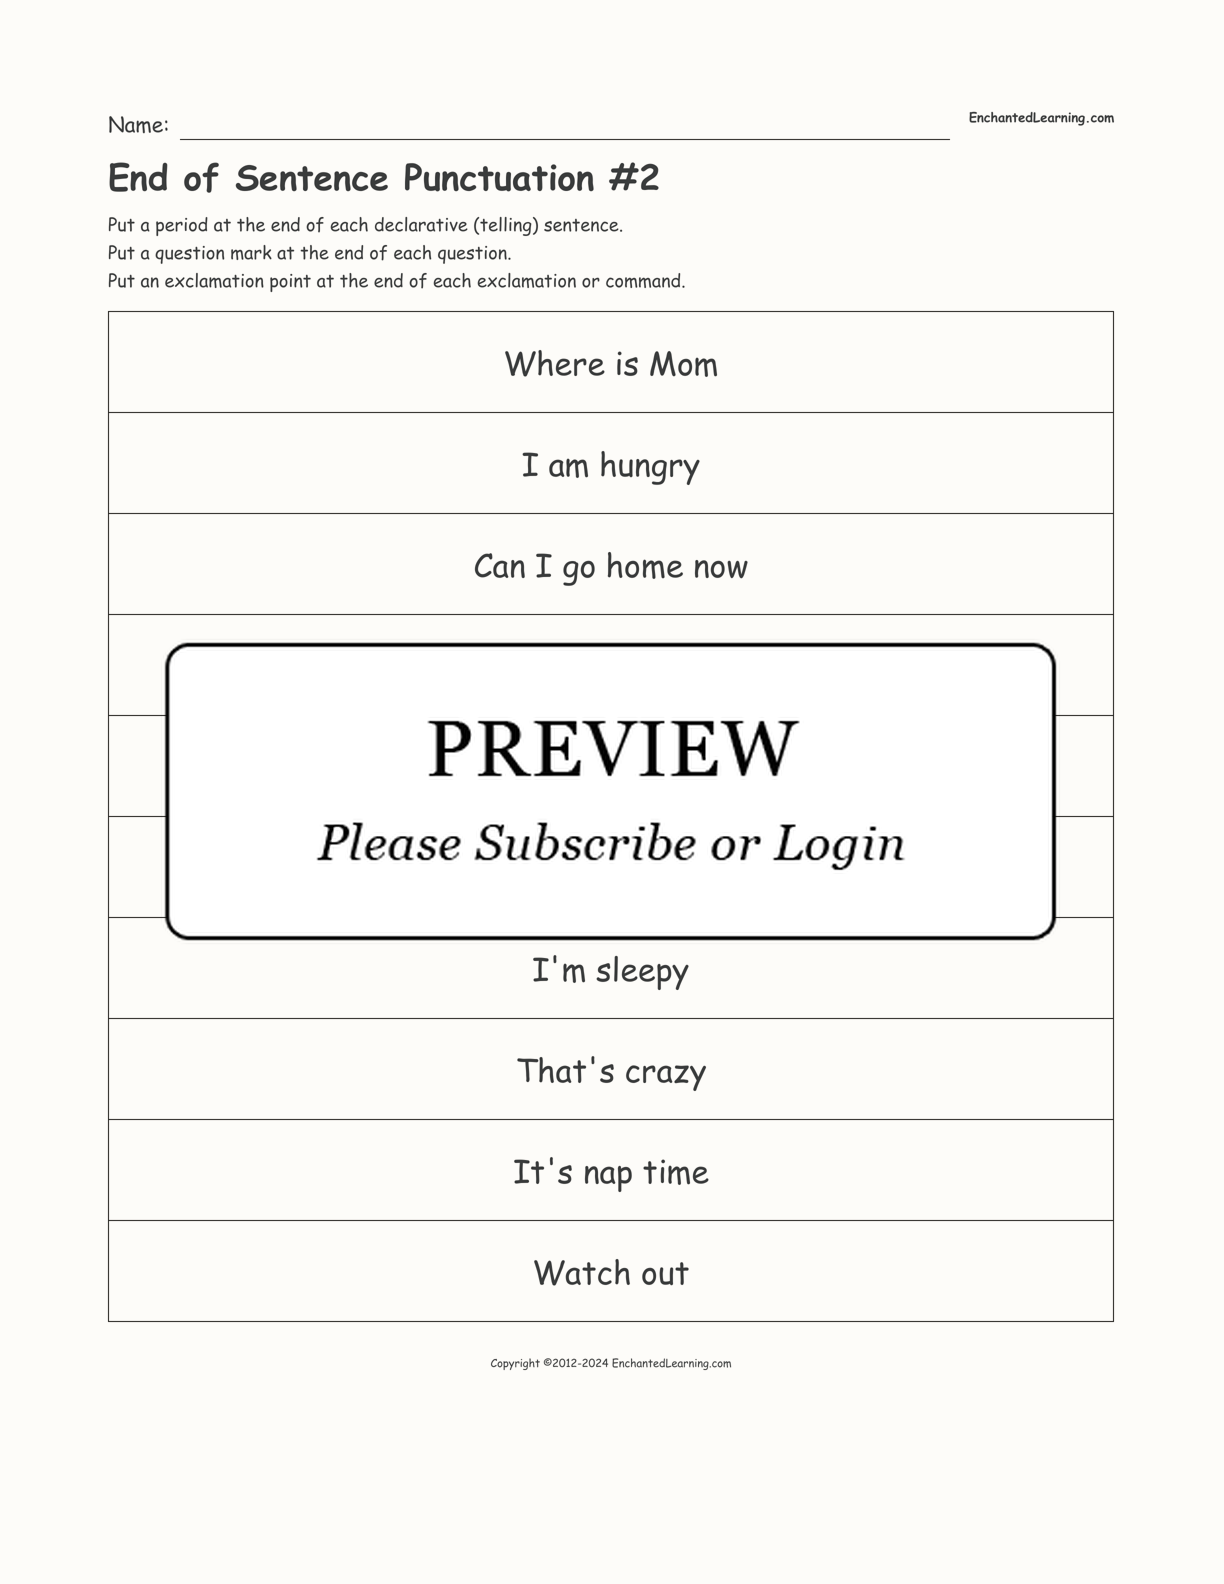 End of Sentence Punctuation #2 interactive worksheet page 1